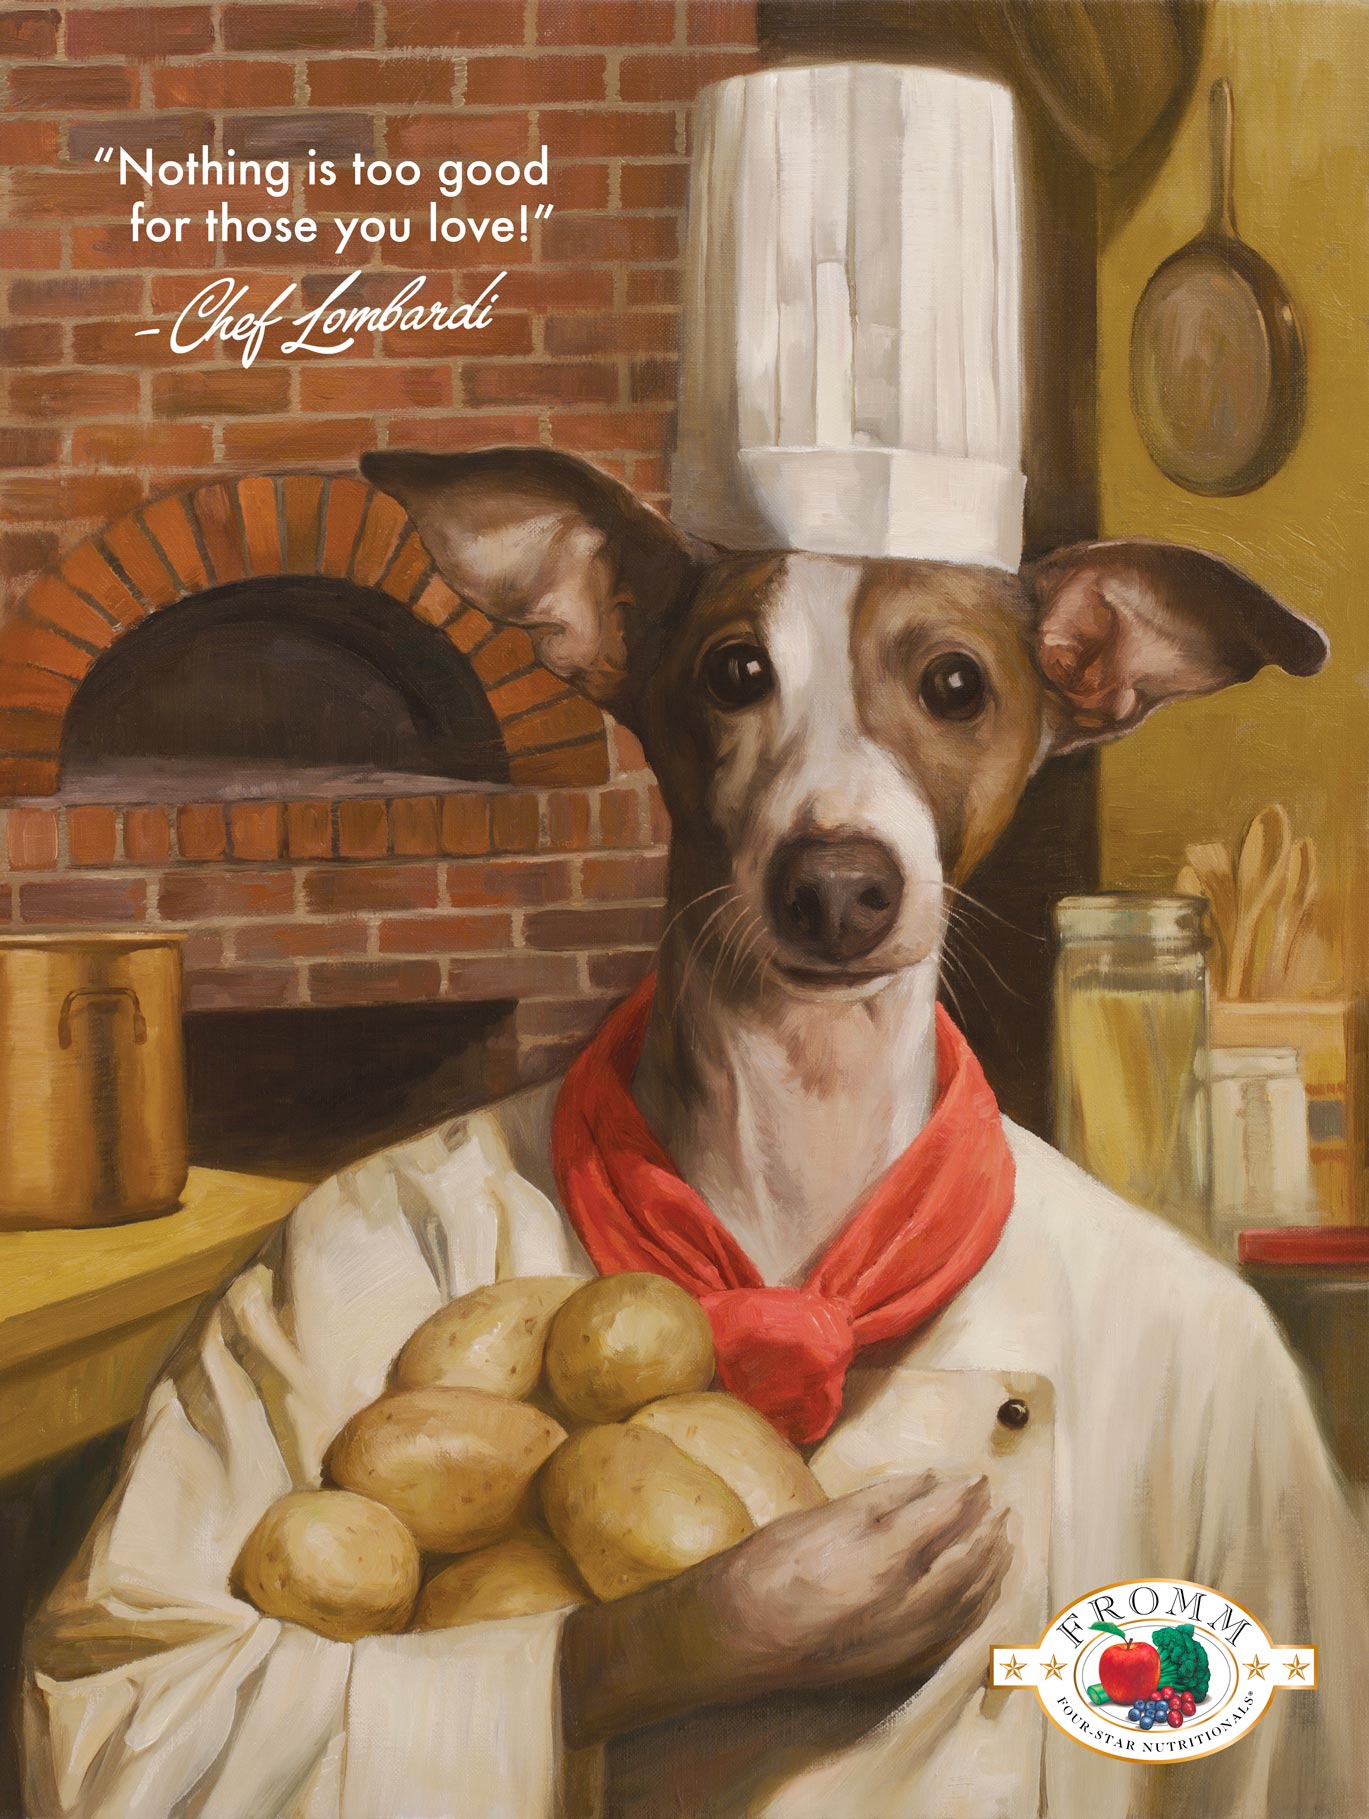 Four-Star Chef Lombardi Art Poster 18x 24in